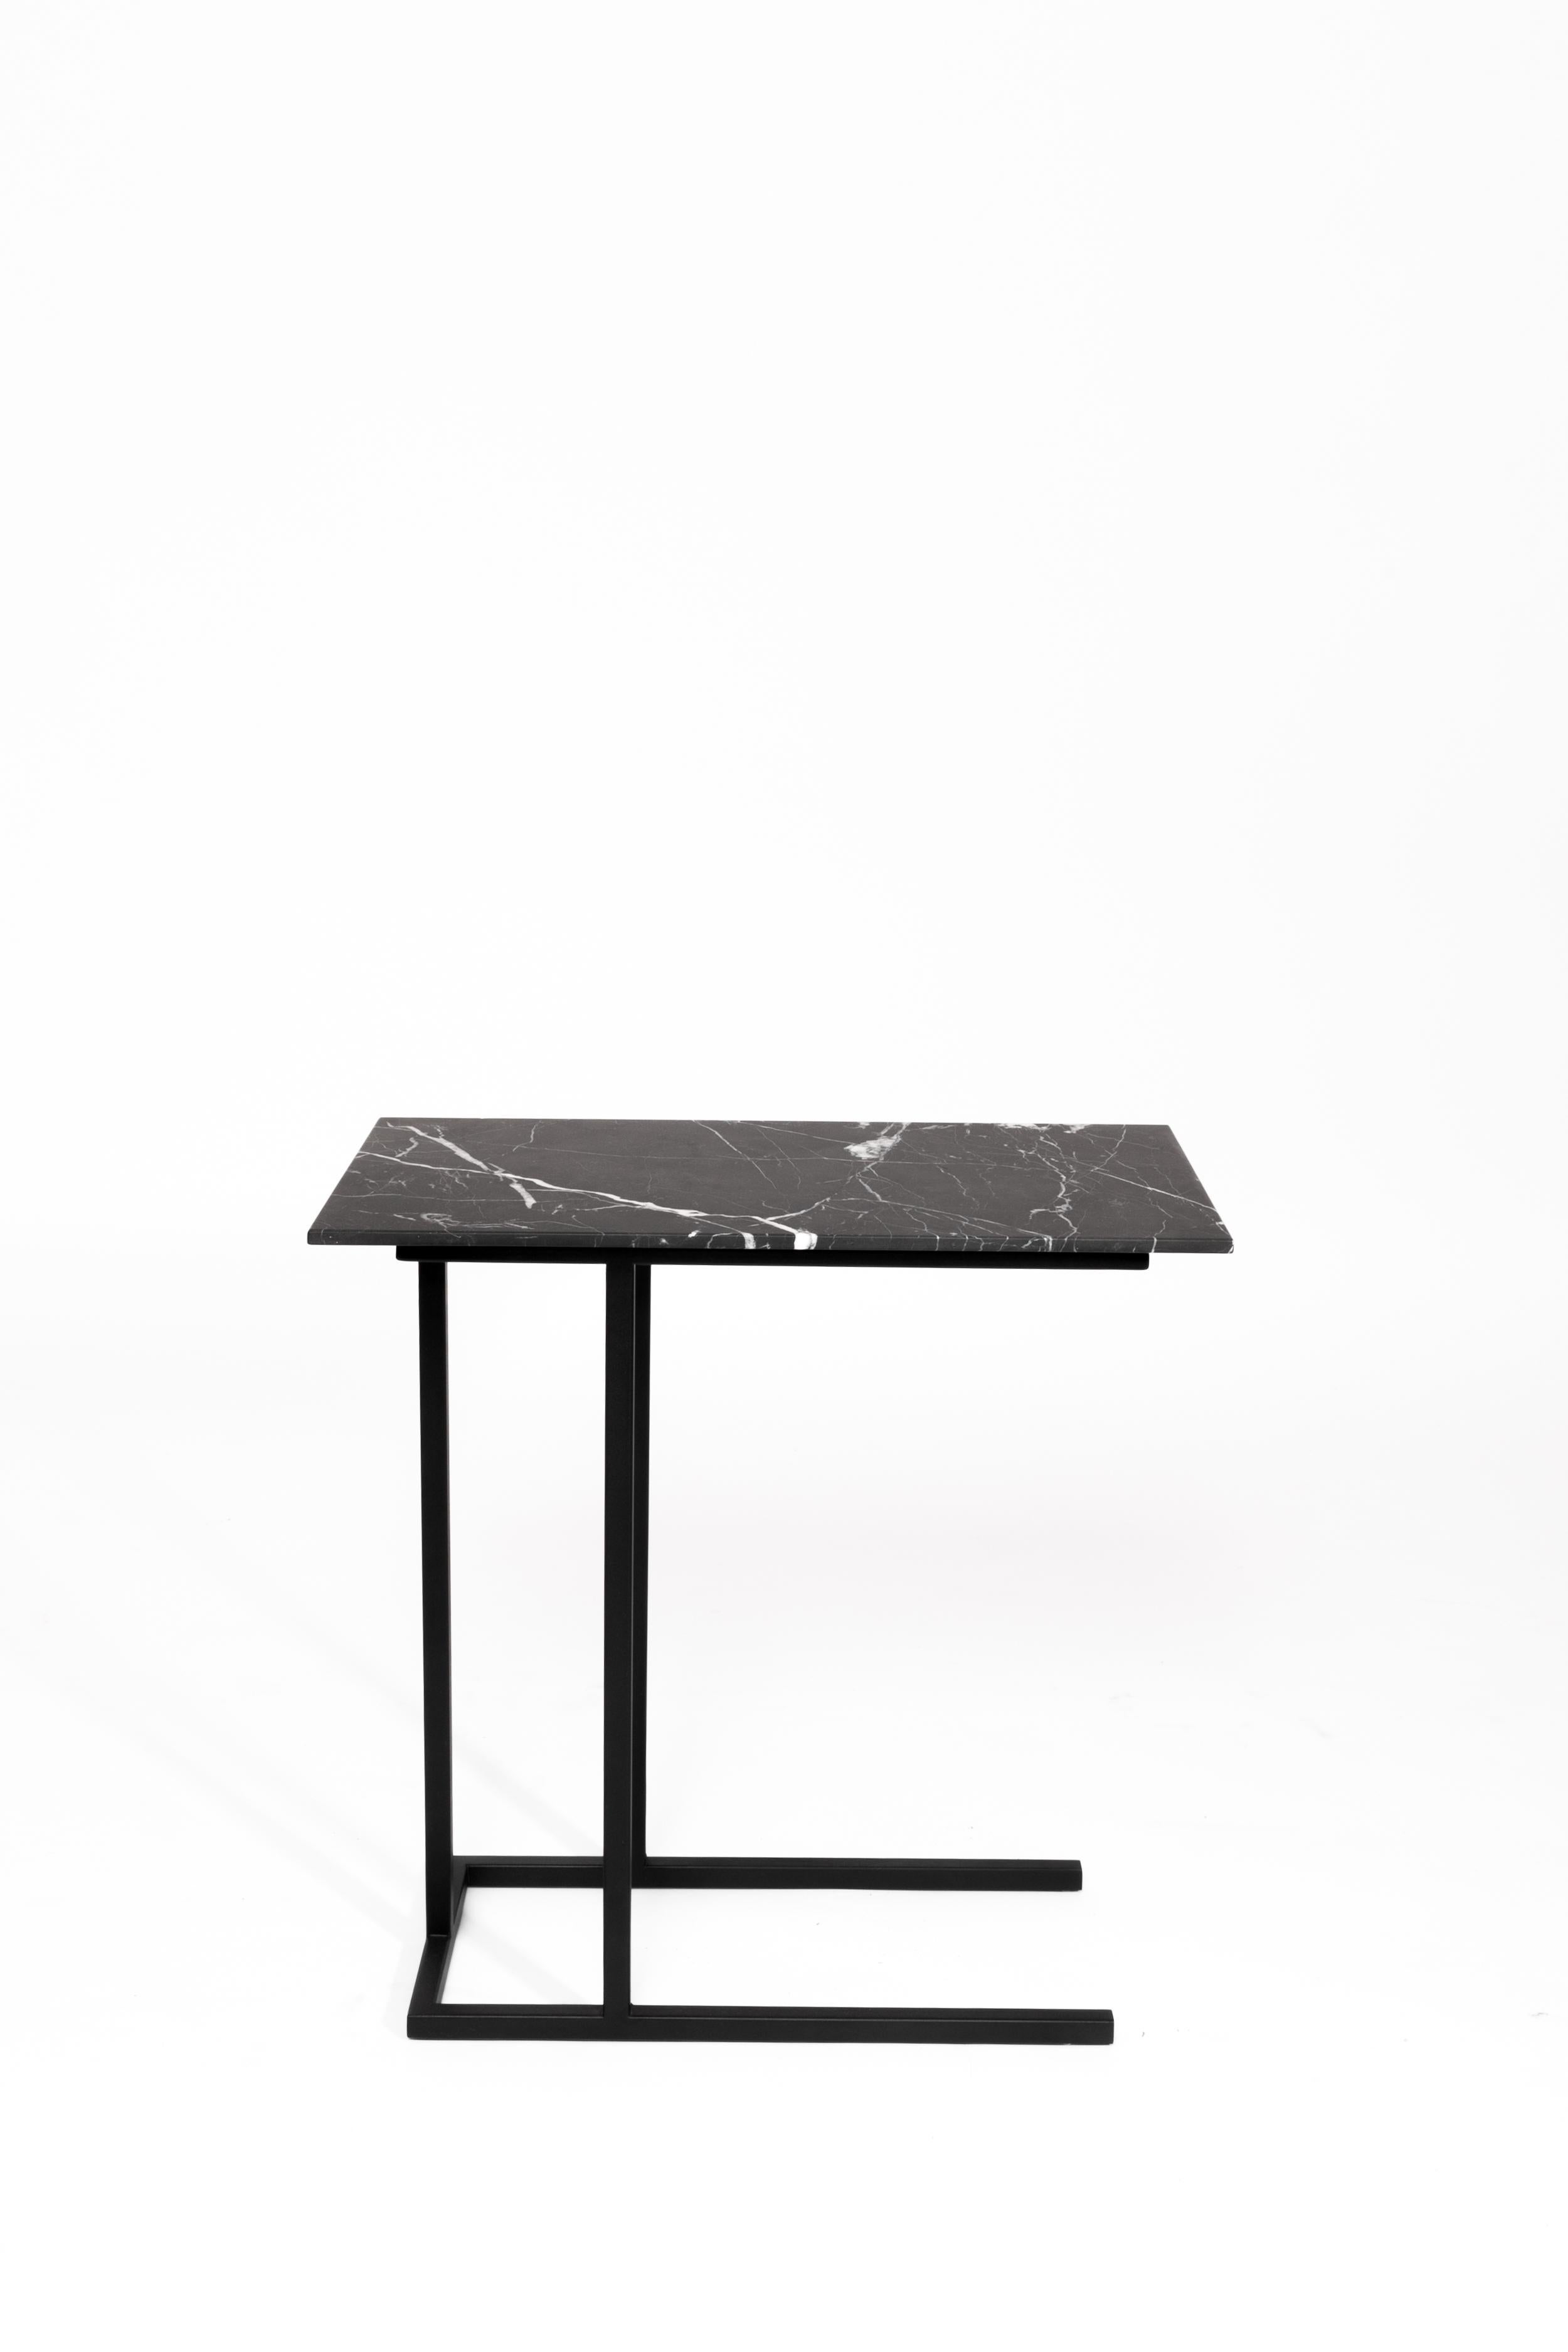 Highly functionalist, the Grapa Side Table is made up of a steel structure in electrostatic paint and covered in matte finish marble. It perceives as a light-handed piece inspired by the rationalist furniture of the 20th century.  Production time: